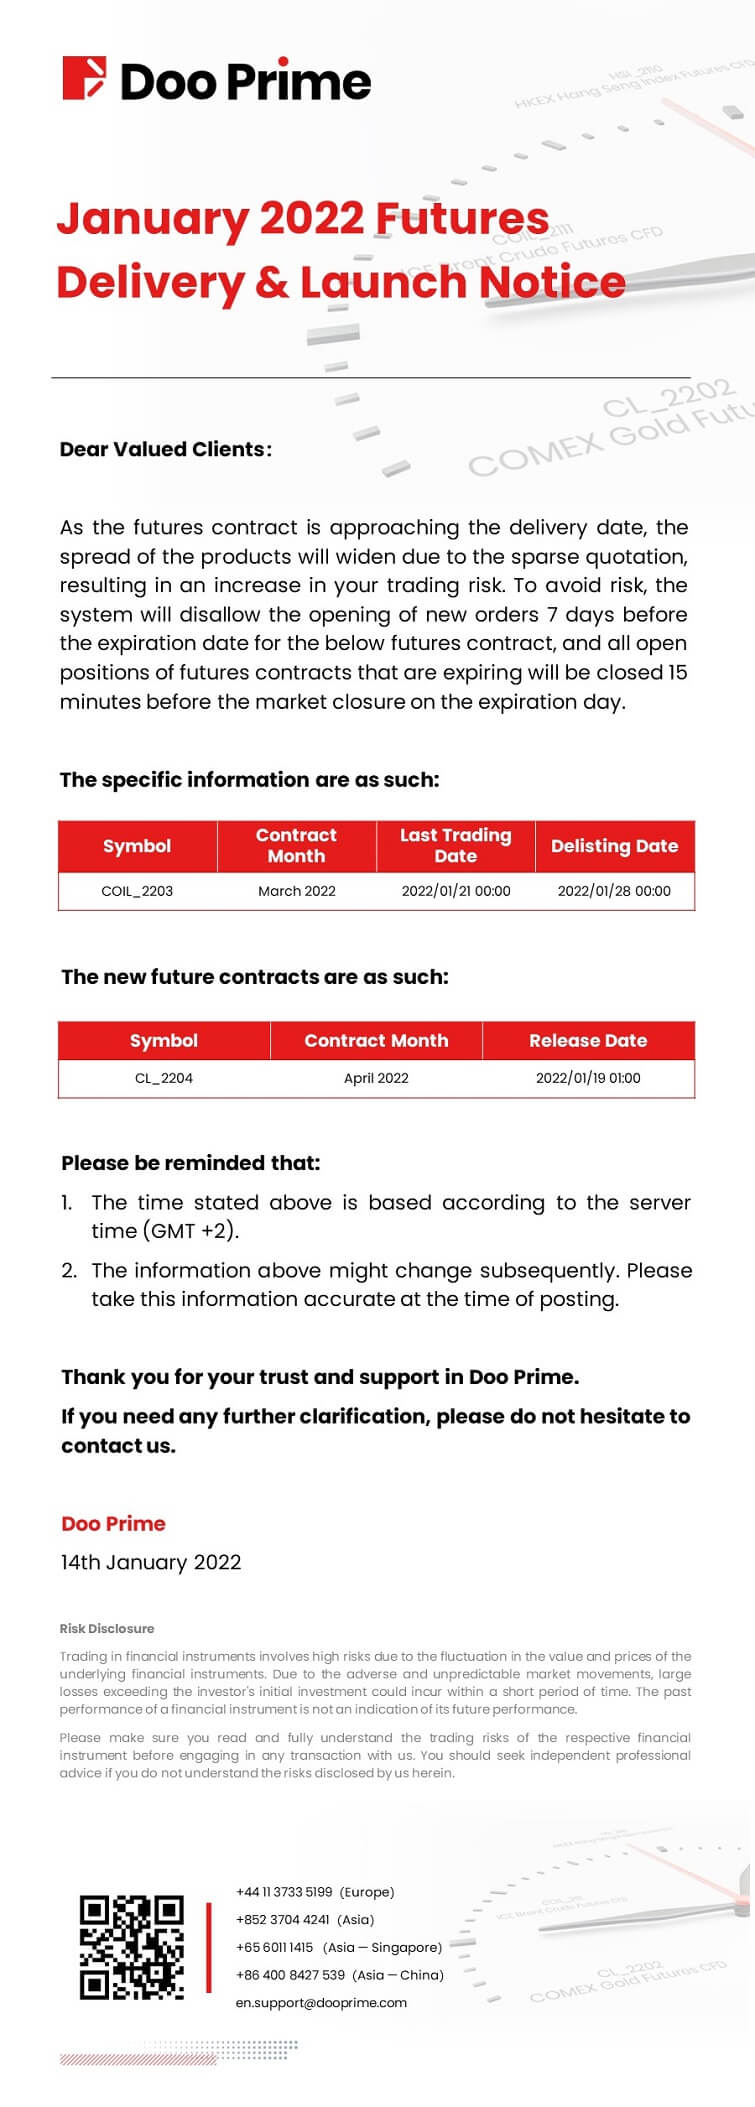 Doo Prime January 2022 Futures Delivery & Launch Notice